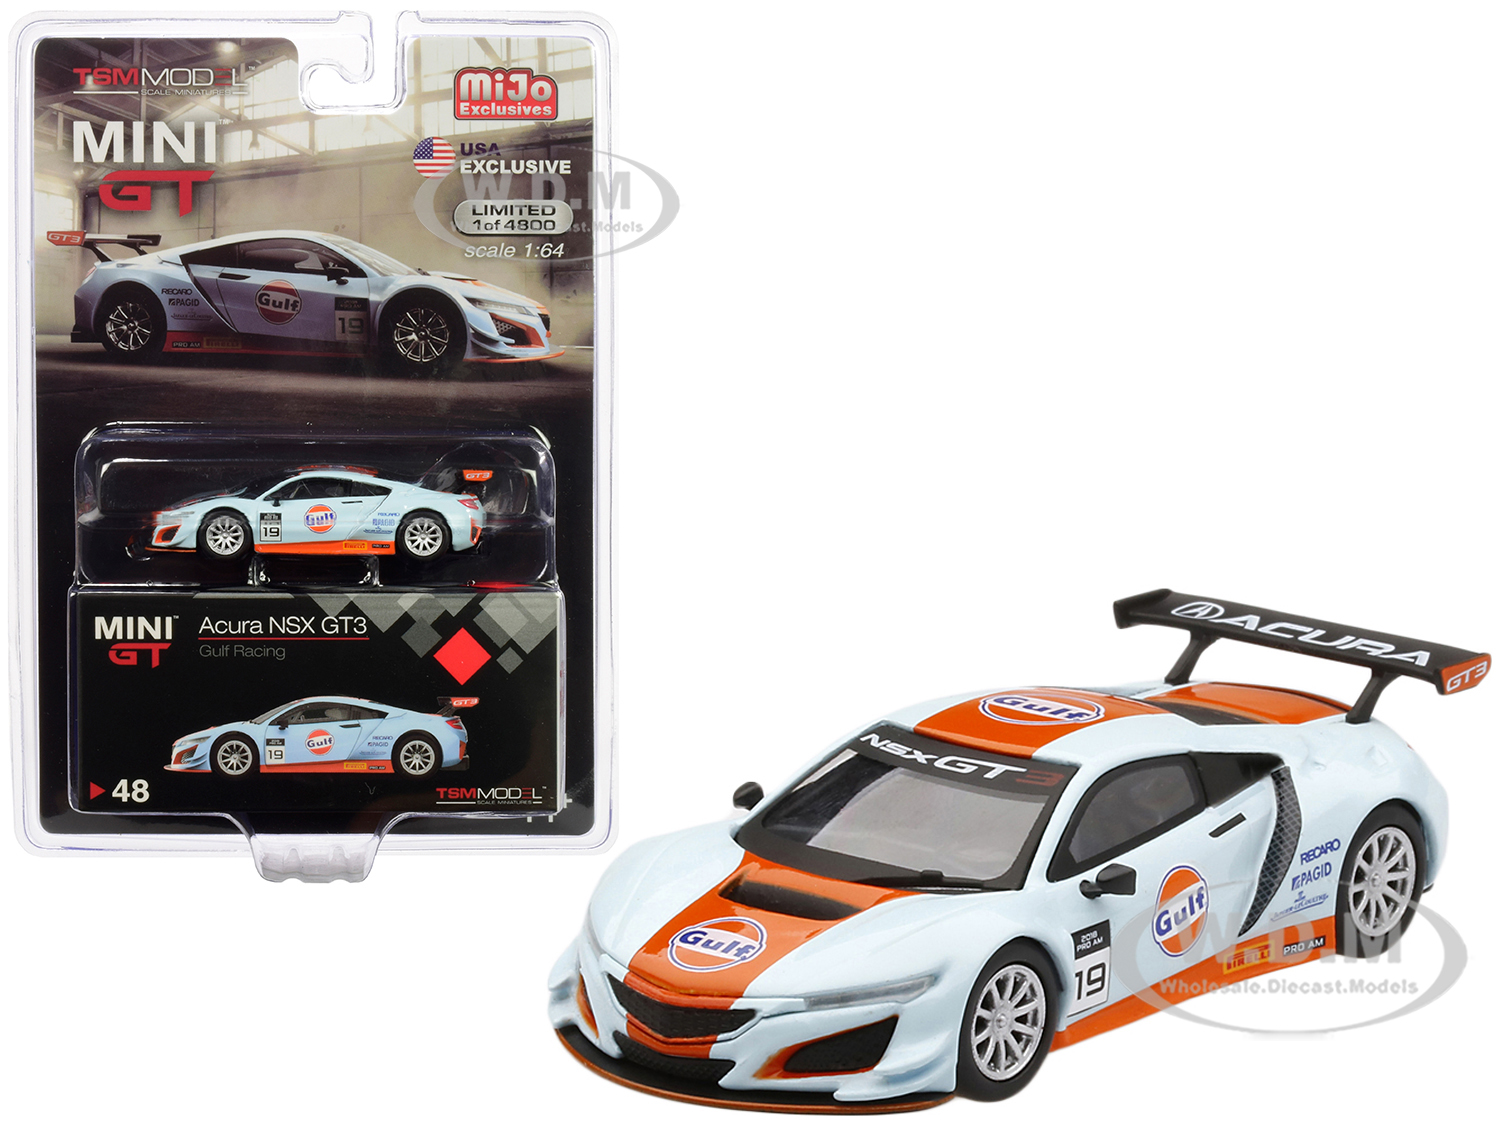 Acura Nsx Gt3 19 "gulf Racing" Light Blue And Orange Limited Edition To 4800 Pieces Worldwide 1/64 Diecast Model Car By True Scale Miniatures